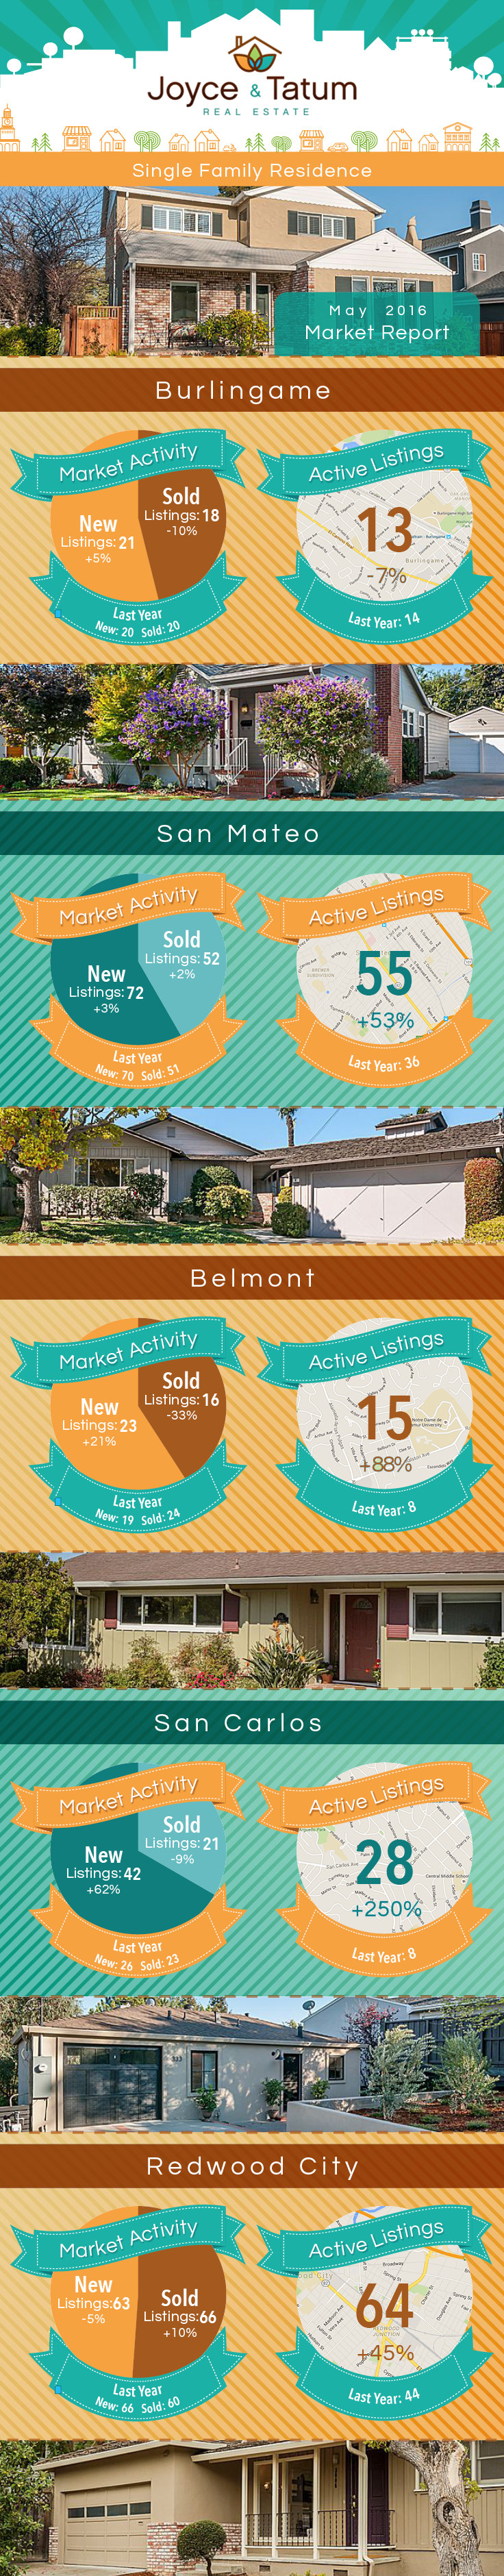 Infographic of the May 2016 Bay Area Real Estate Market Stats